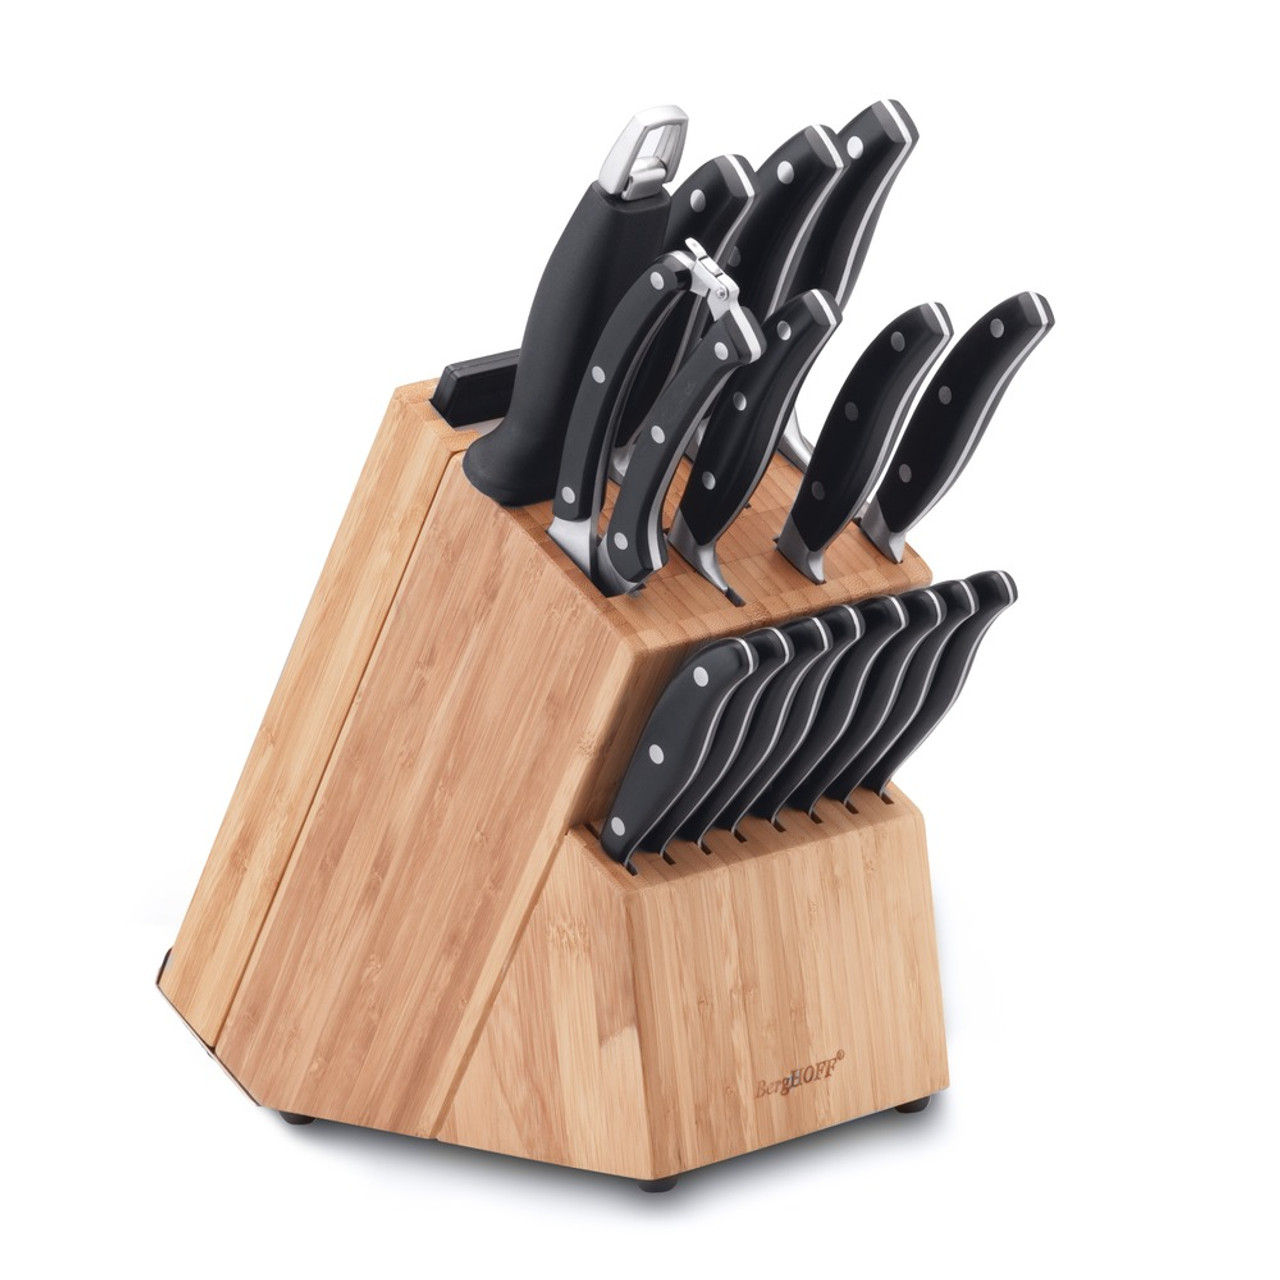 BergHOFF Essentials 20 piece Forged Stainless Steel Cutlery Set